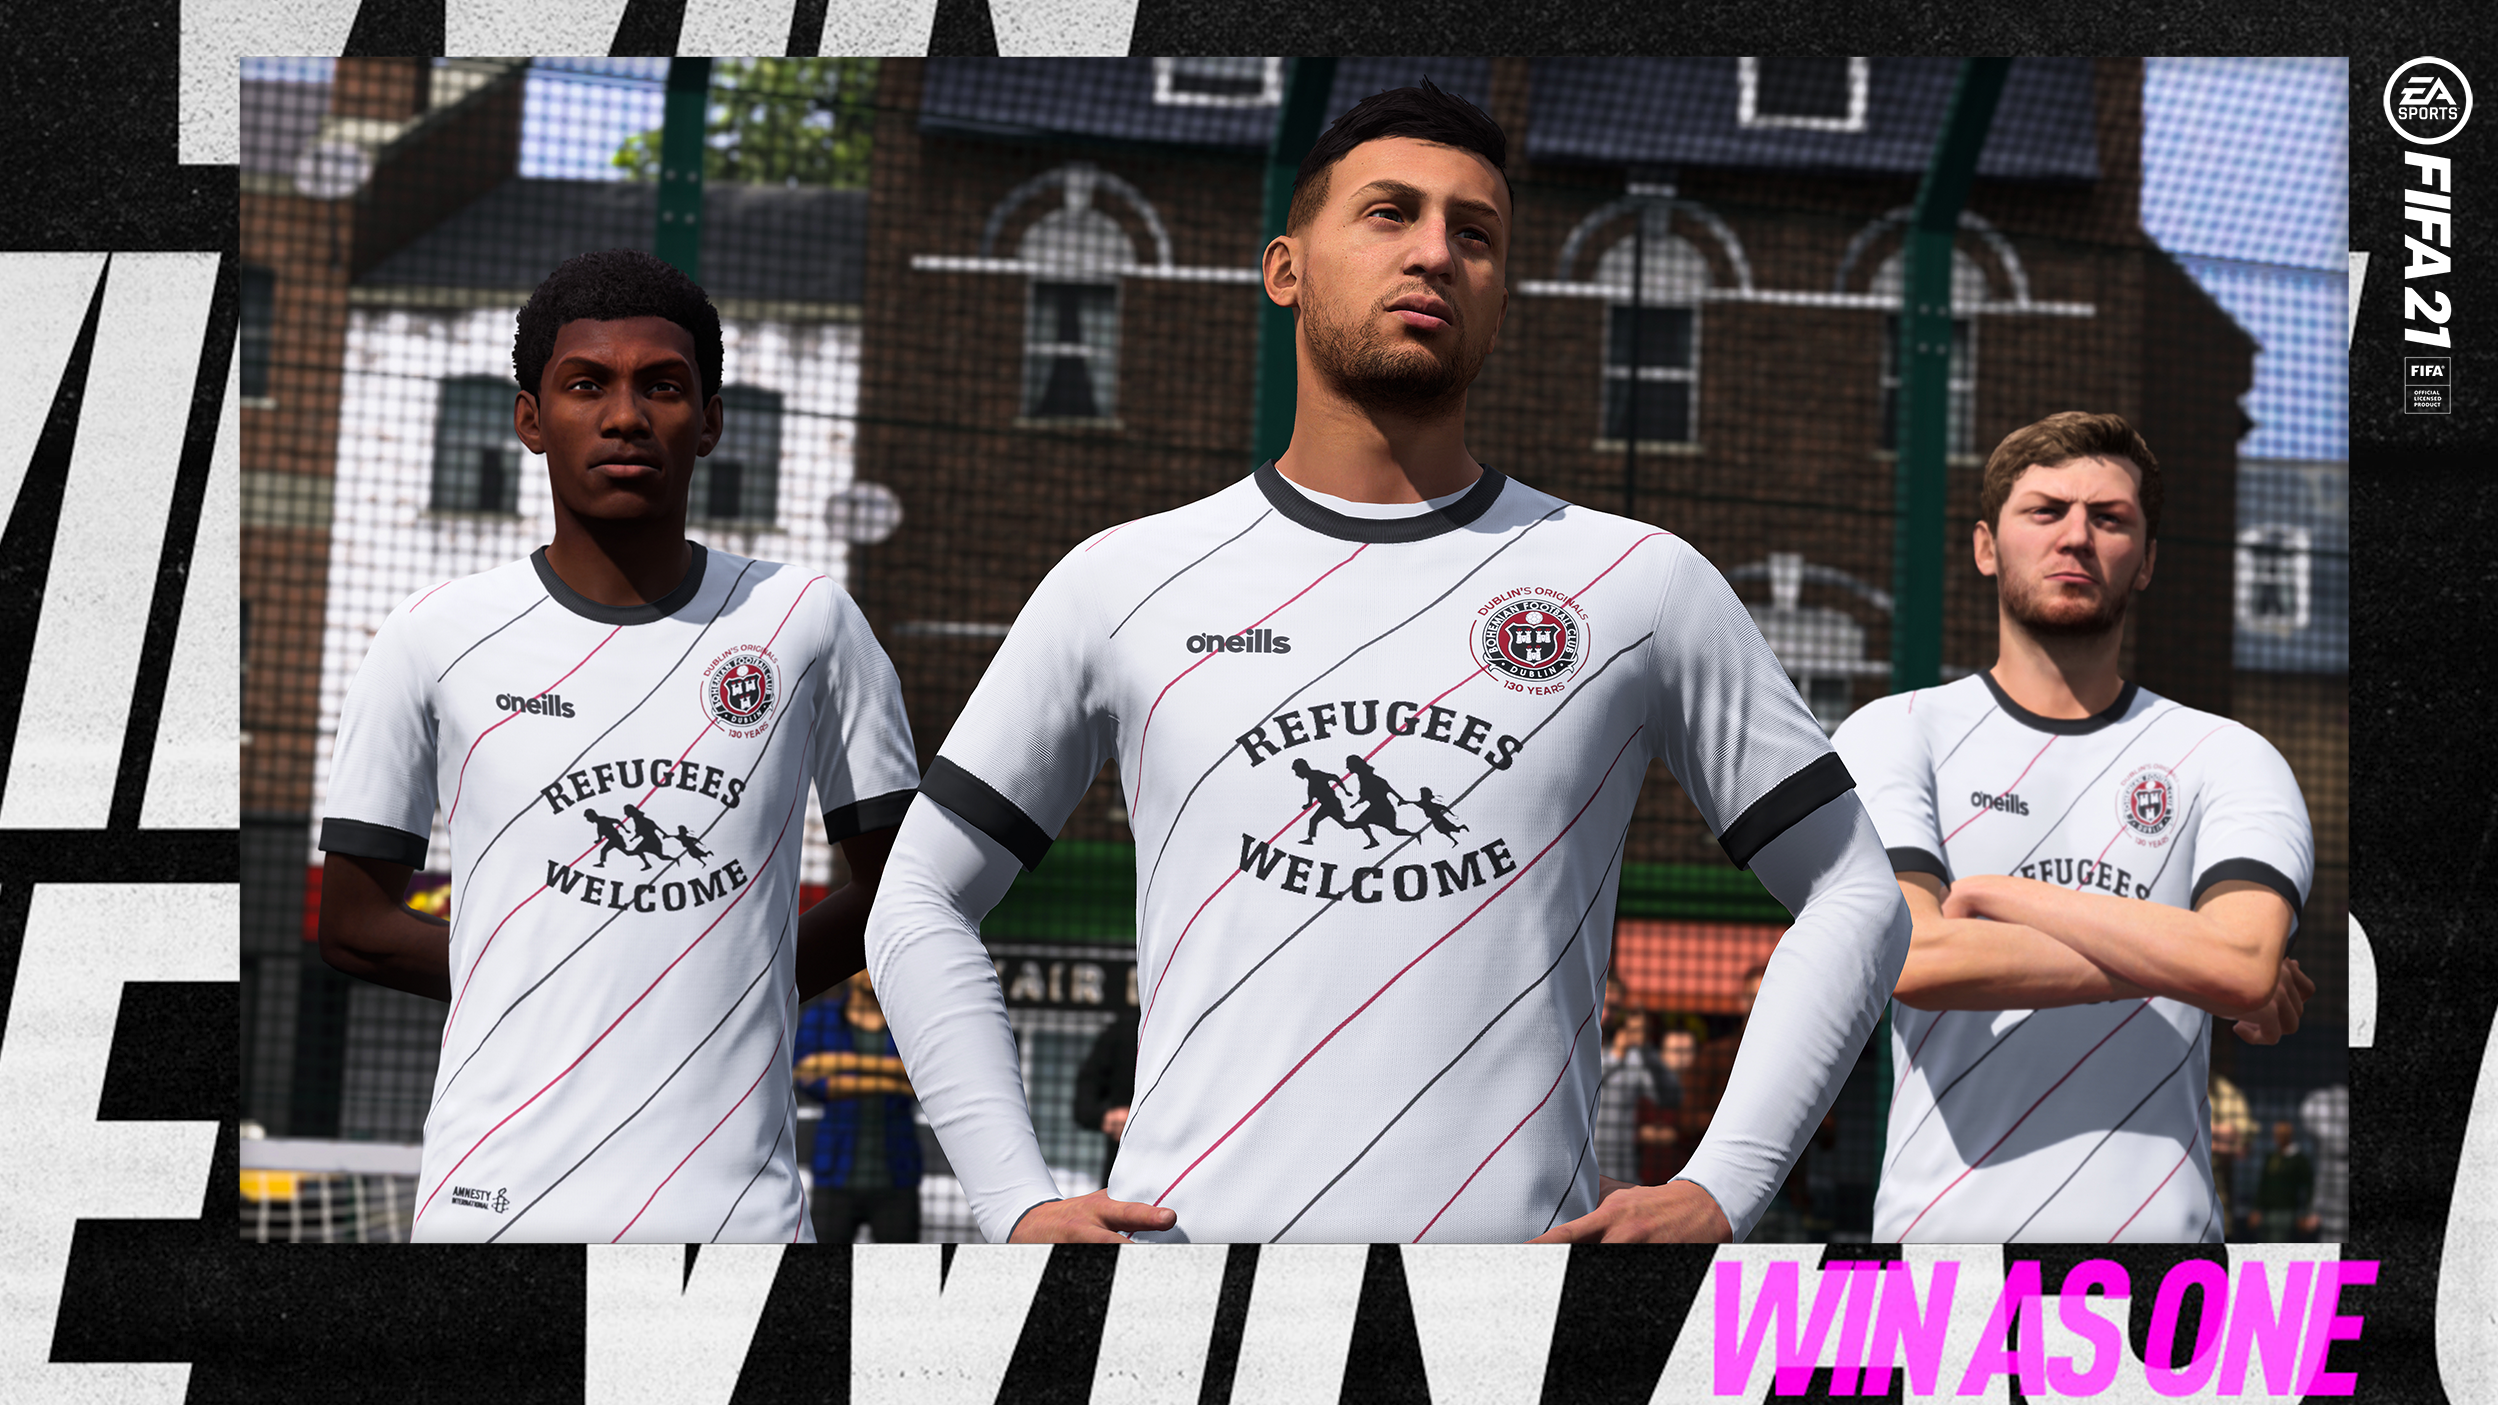 ‘Refugees Welcome’ football jersey goes global in FIFA 2021 game